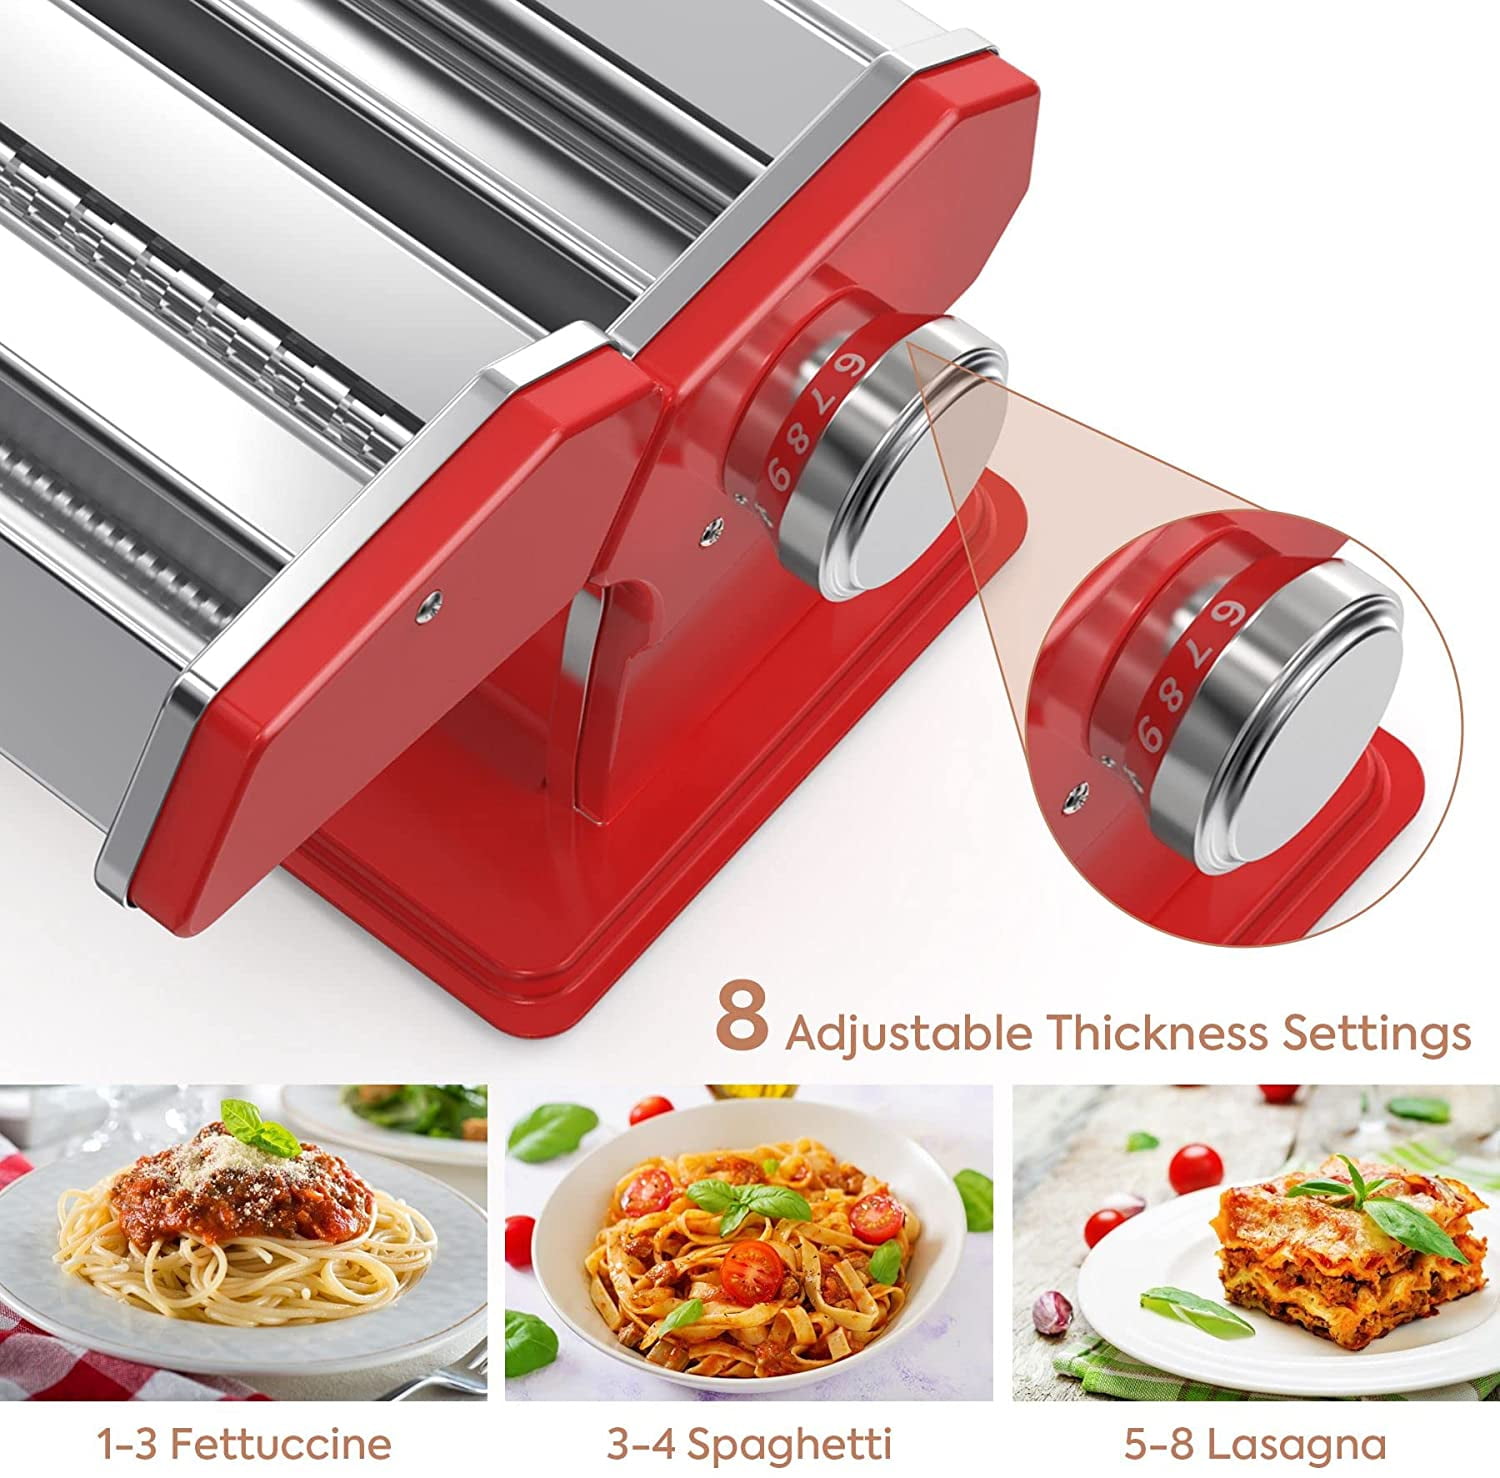 Ktaxon Pasta Machine, Roller Pasta Maker, Adjustable Thickness Settings  Noodles Maker with Washable Rollers and Cutter,Perfect for Spaghetti,  Fettuccini, Lasagna or Dumpling Skins 